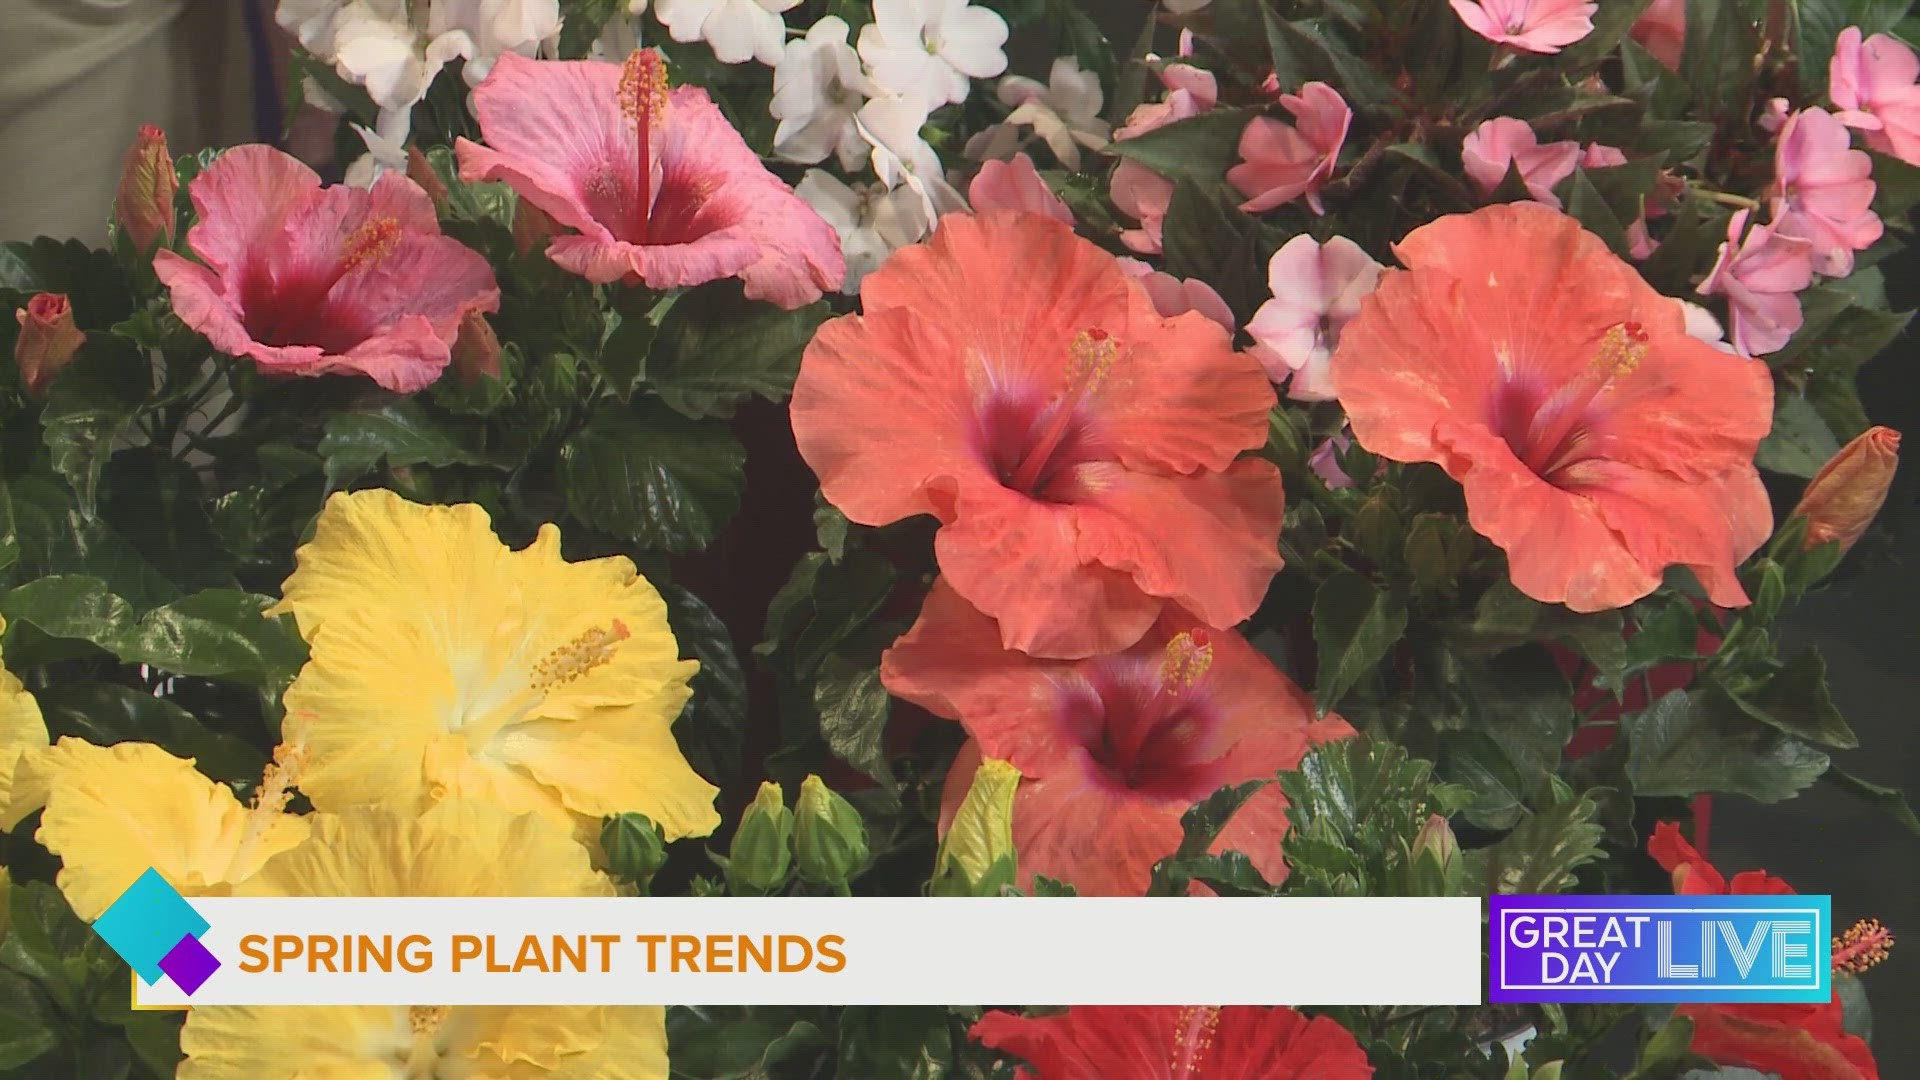 Our GDL studio is in full bloom with Justin Hancock from Costa Farms showing us what’s trending this spring when it comes to plants.